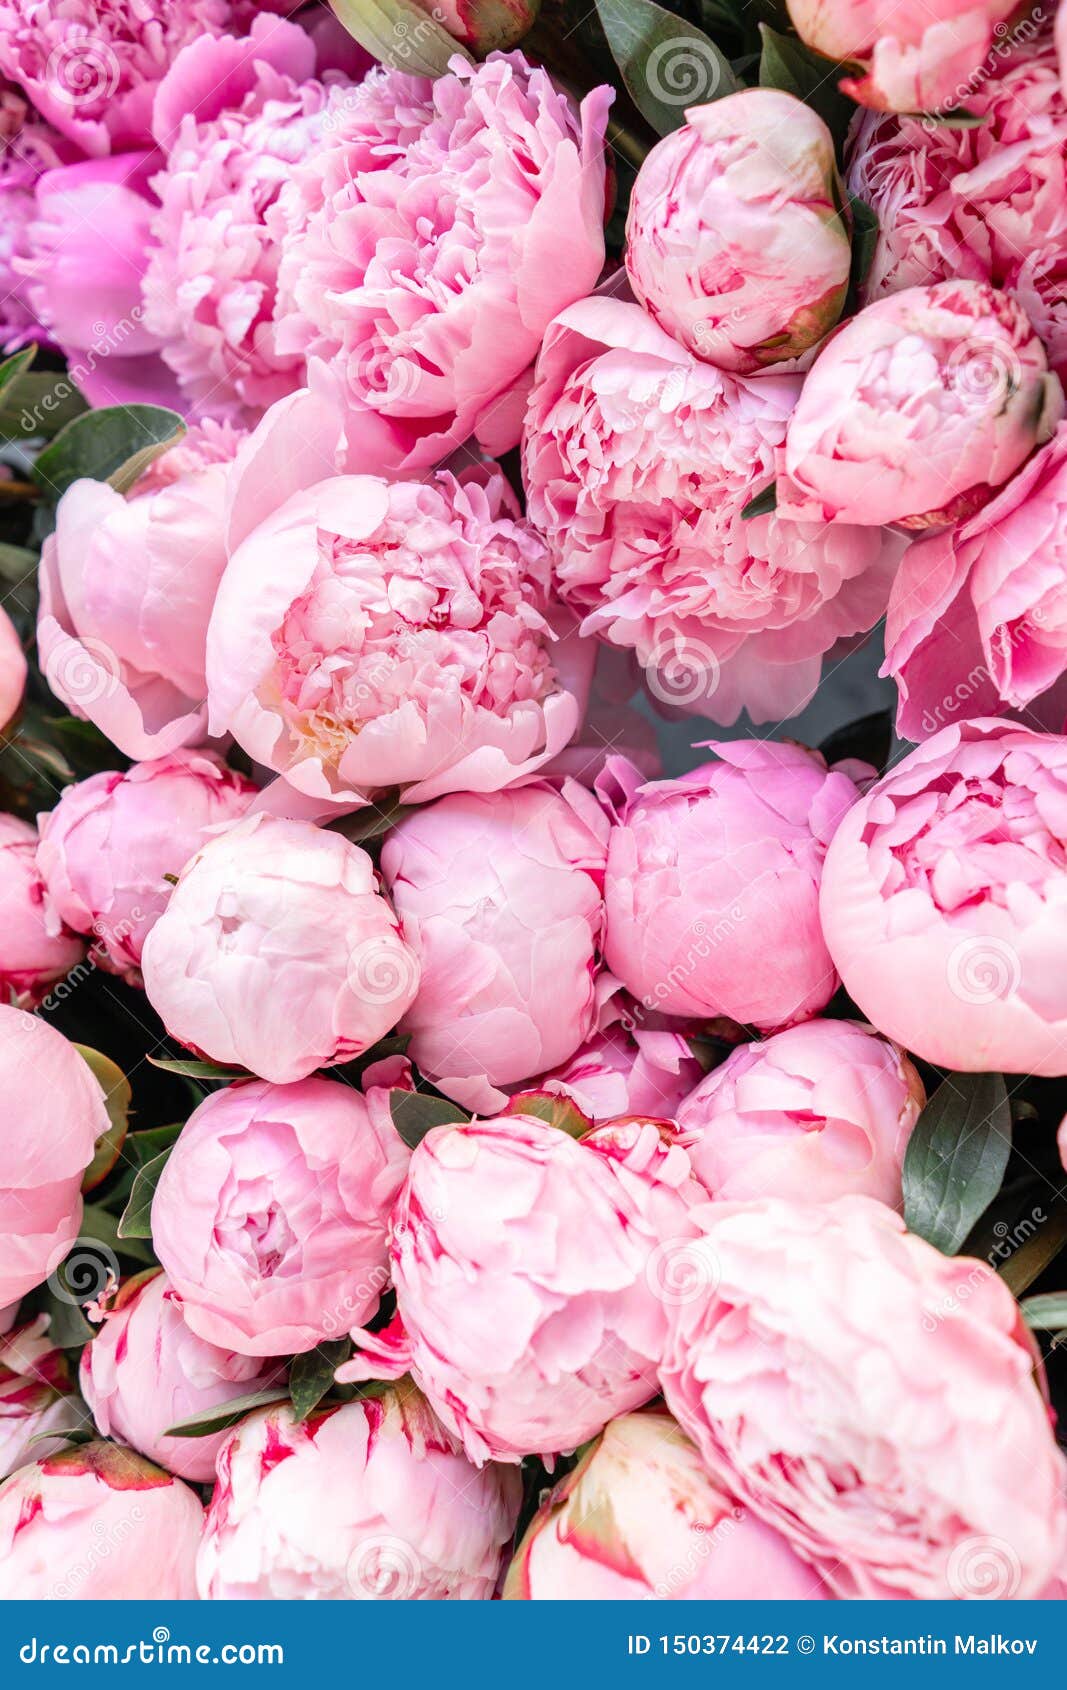 Floral Carpet or Wallpaper. Background of Pink Peonies. Morning Light in  the Room Stock Photo - Image of peonies, carpet: 150374422